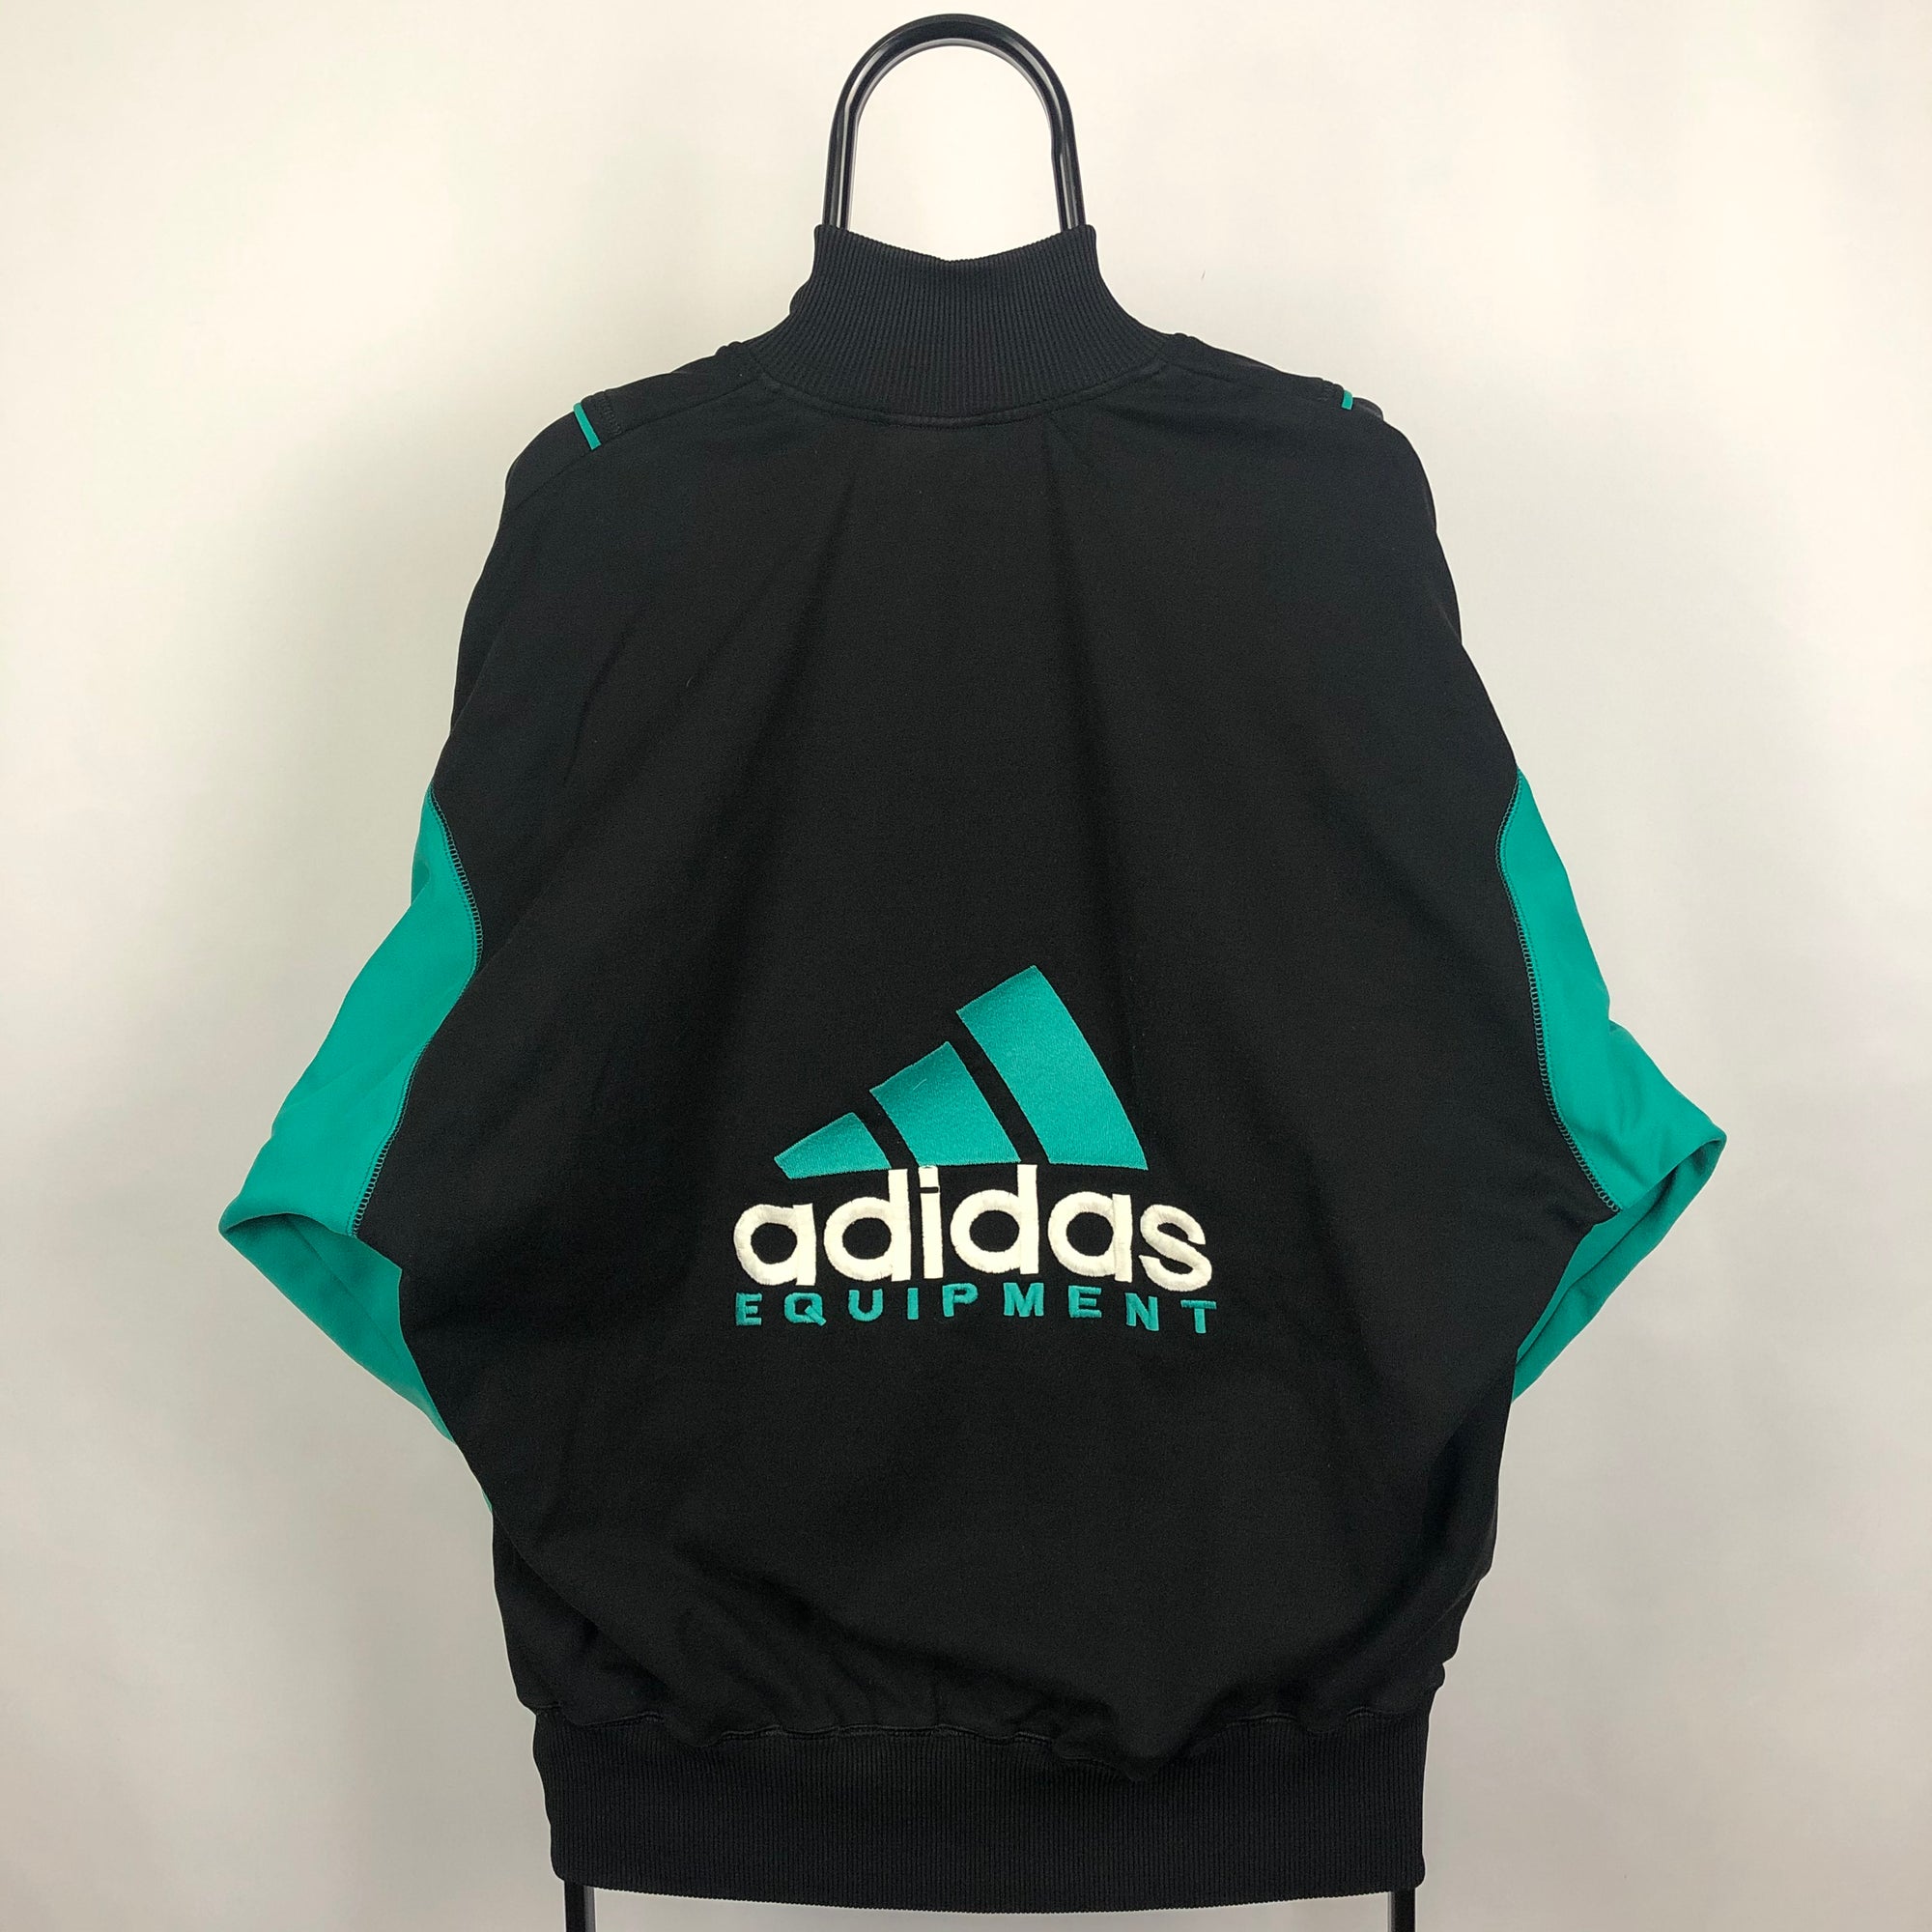 Adidas Equipment Full Tracksuit Including Track Pants - Men's Large/Women's XL